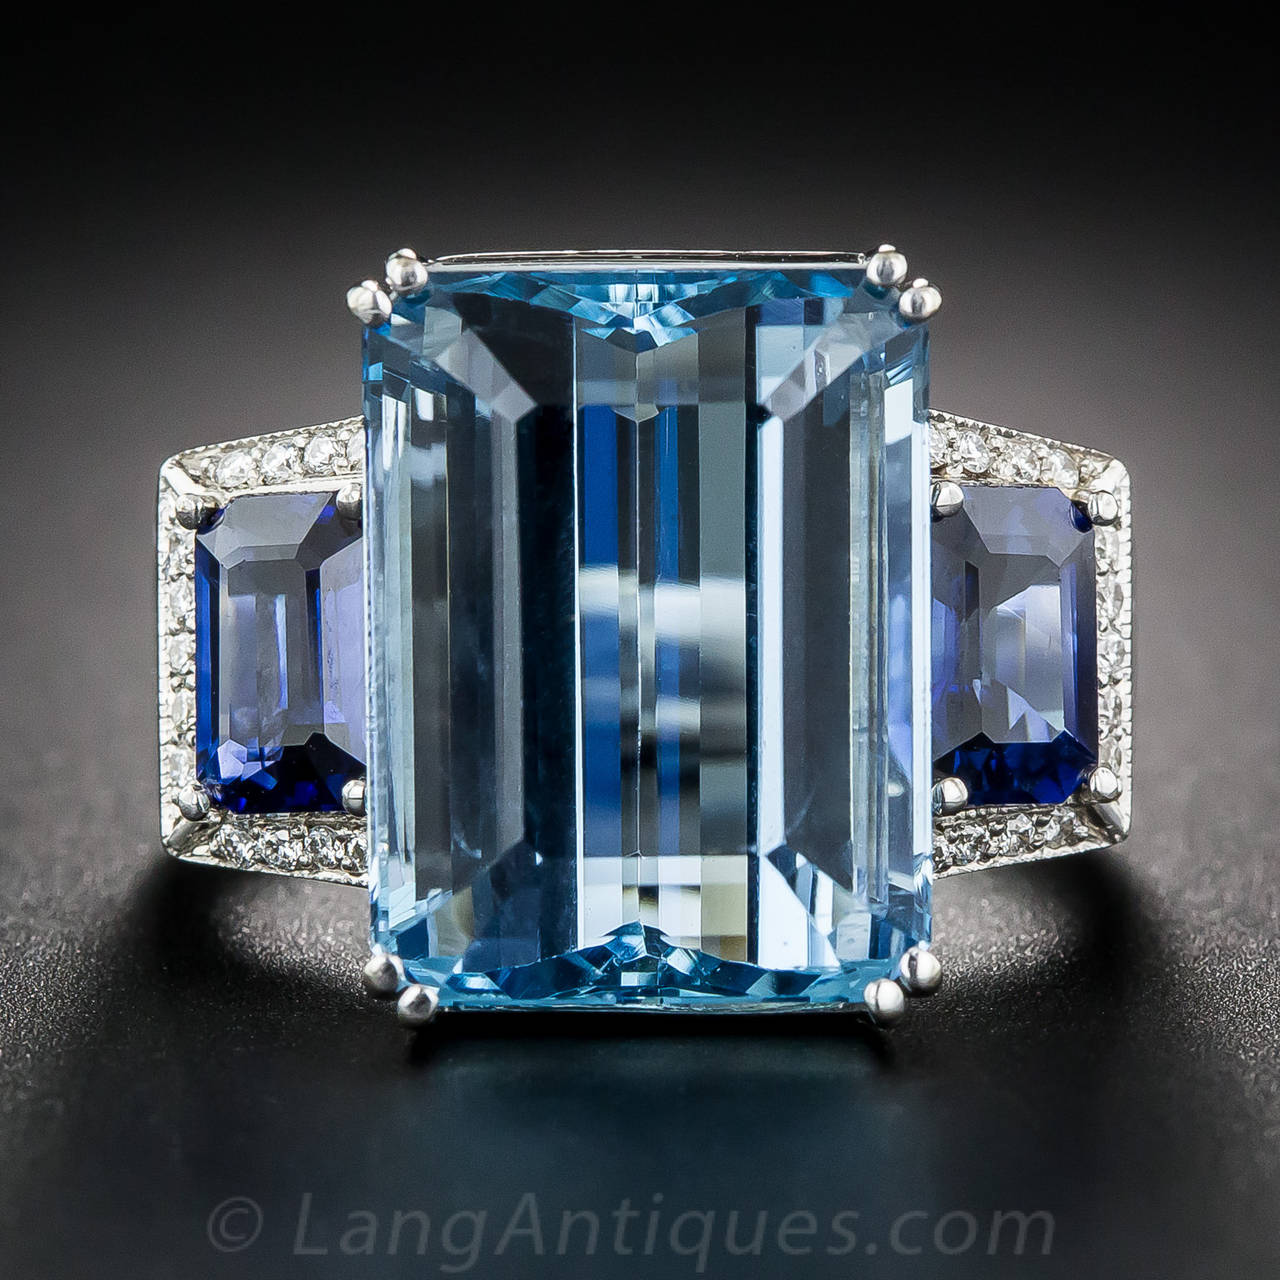 A gem Santa Maria aquamarine, weighing 11 carats, displaying about the finest, deeply saturated color imaginable, glistens and glows between a matched pair of rich, royal blue, emerald-cut sapphires, weighing over one carat each, framed on three